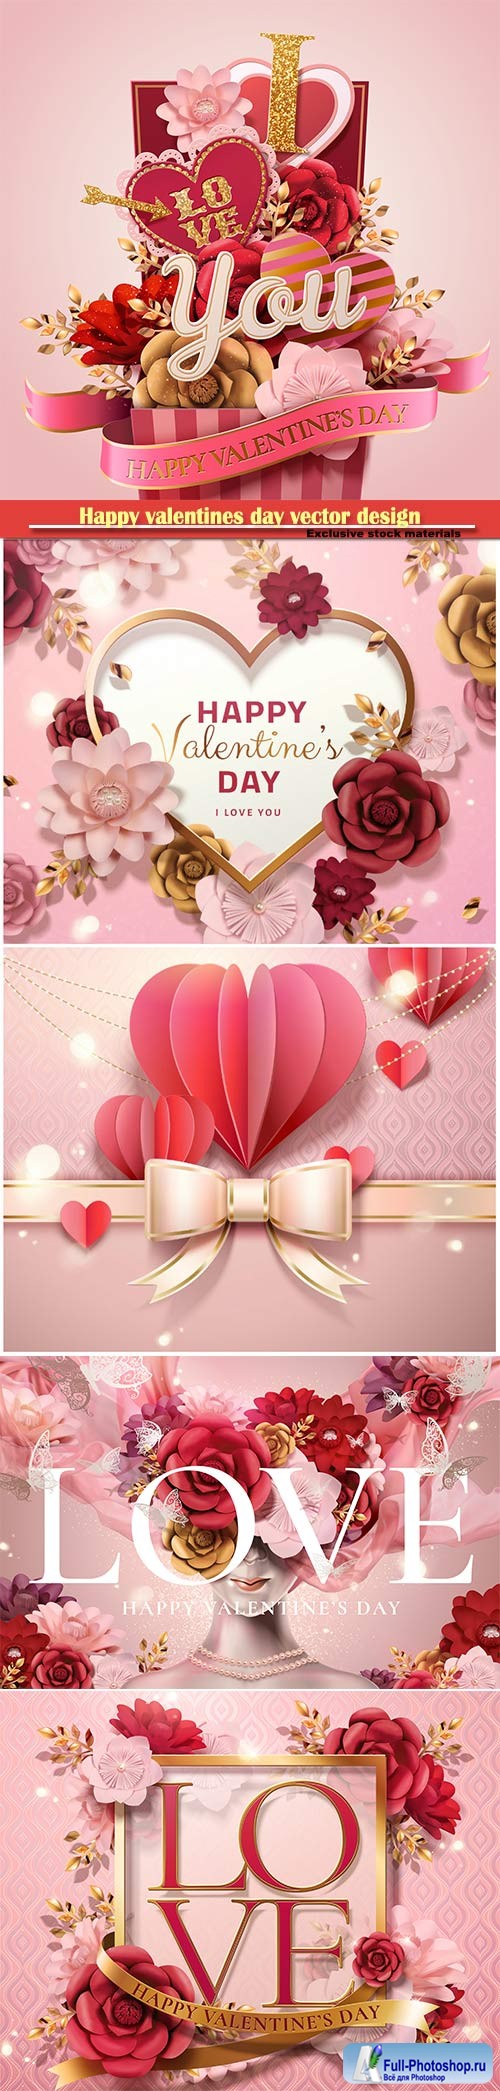 Happy valentines day vector design with heart, balloons, roses in 3d illustration # 4